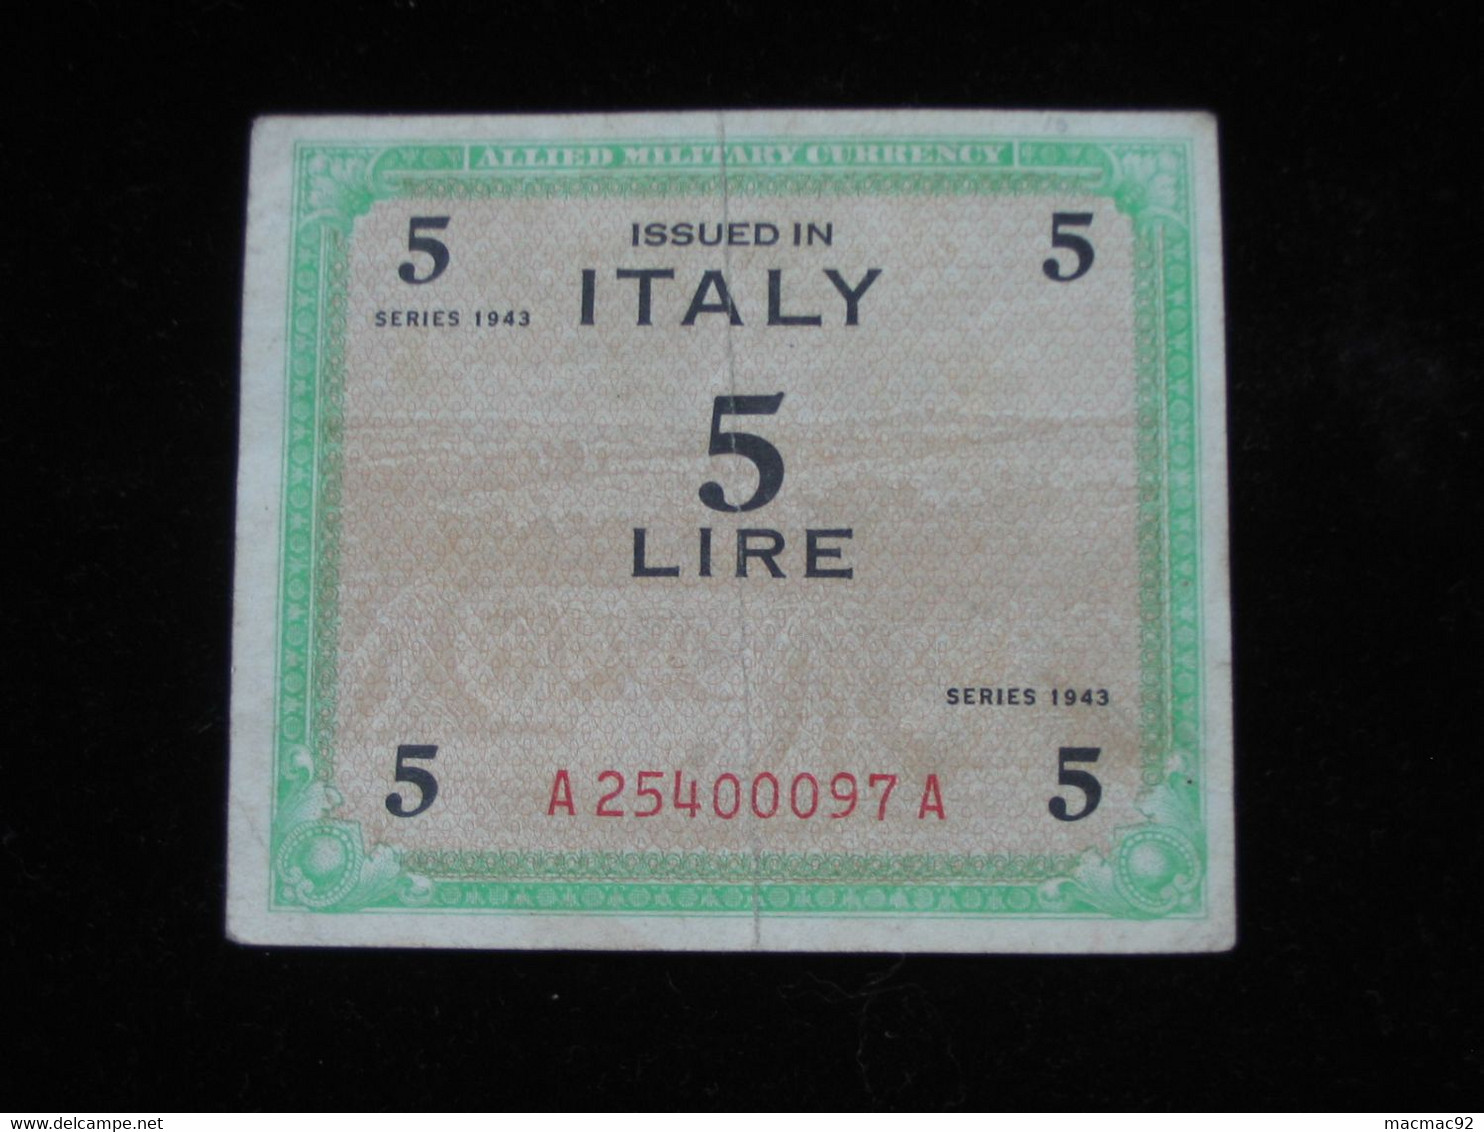 ITALIE - 5 Lire  Issued In ITALY - Allied Military Currency - Série 1943  **** EN ACHAT IMMEDIAT **** - Occupation Alliés Seconde Guerre Mondiale